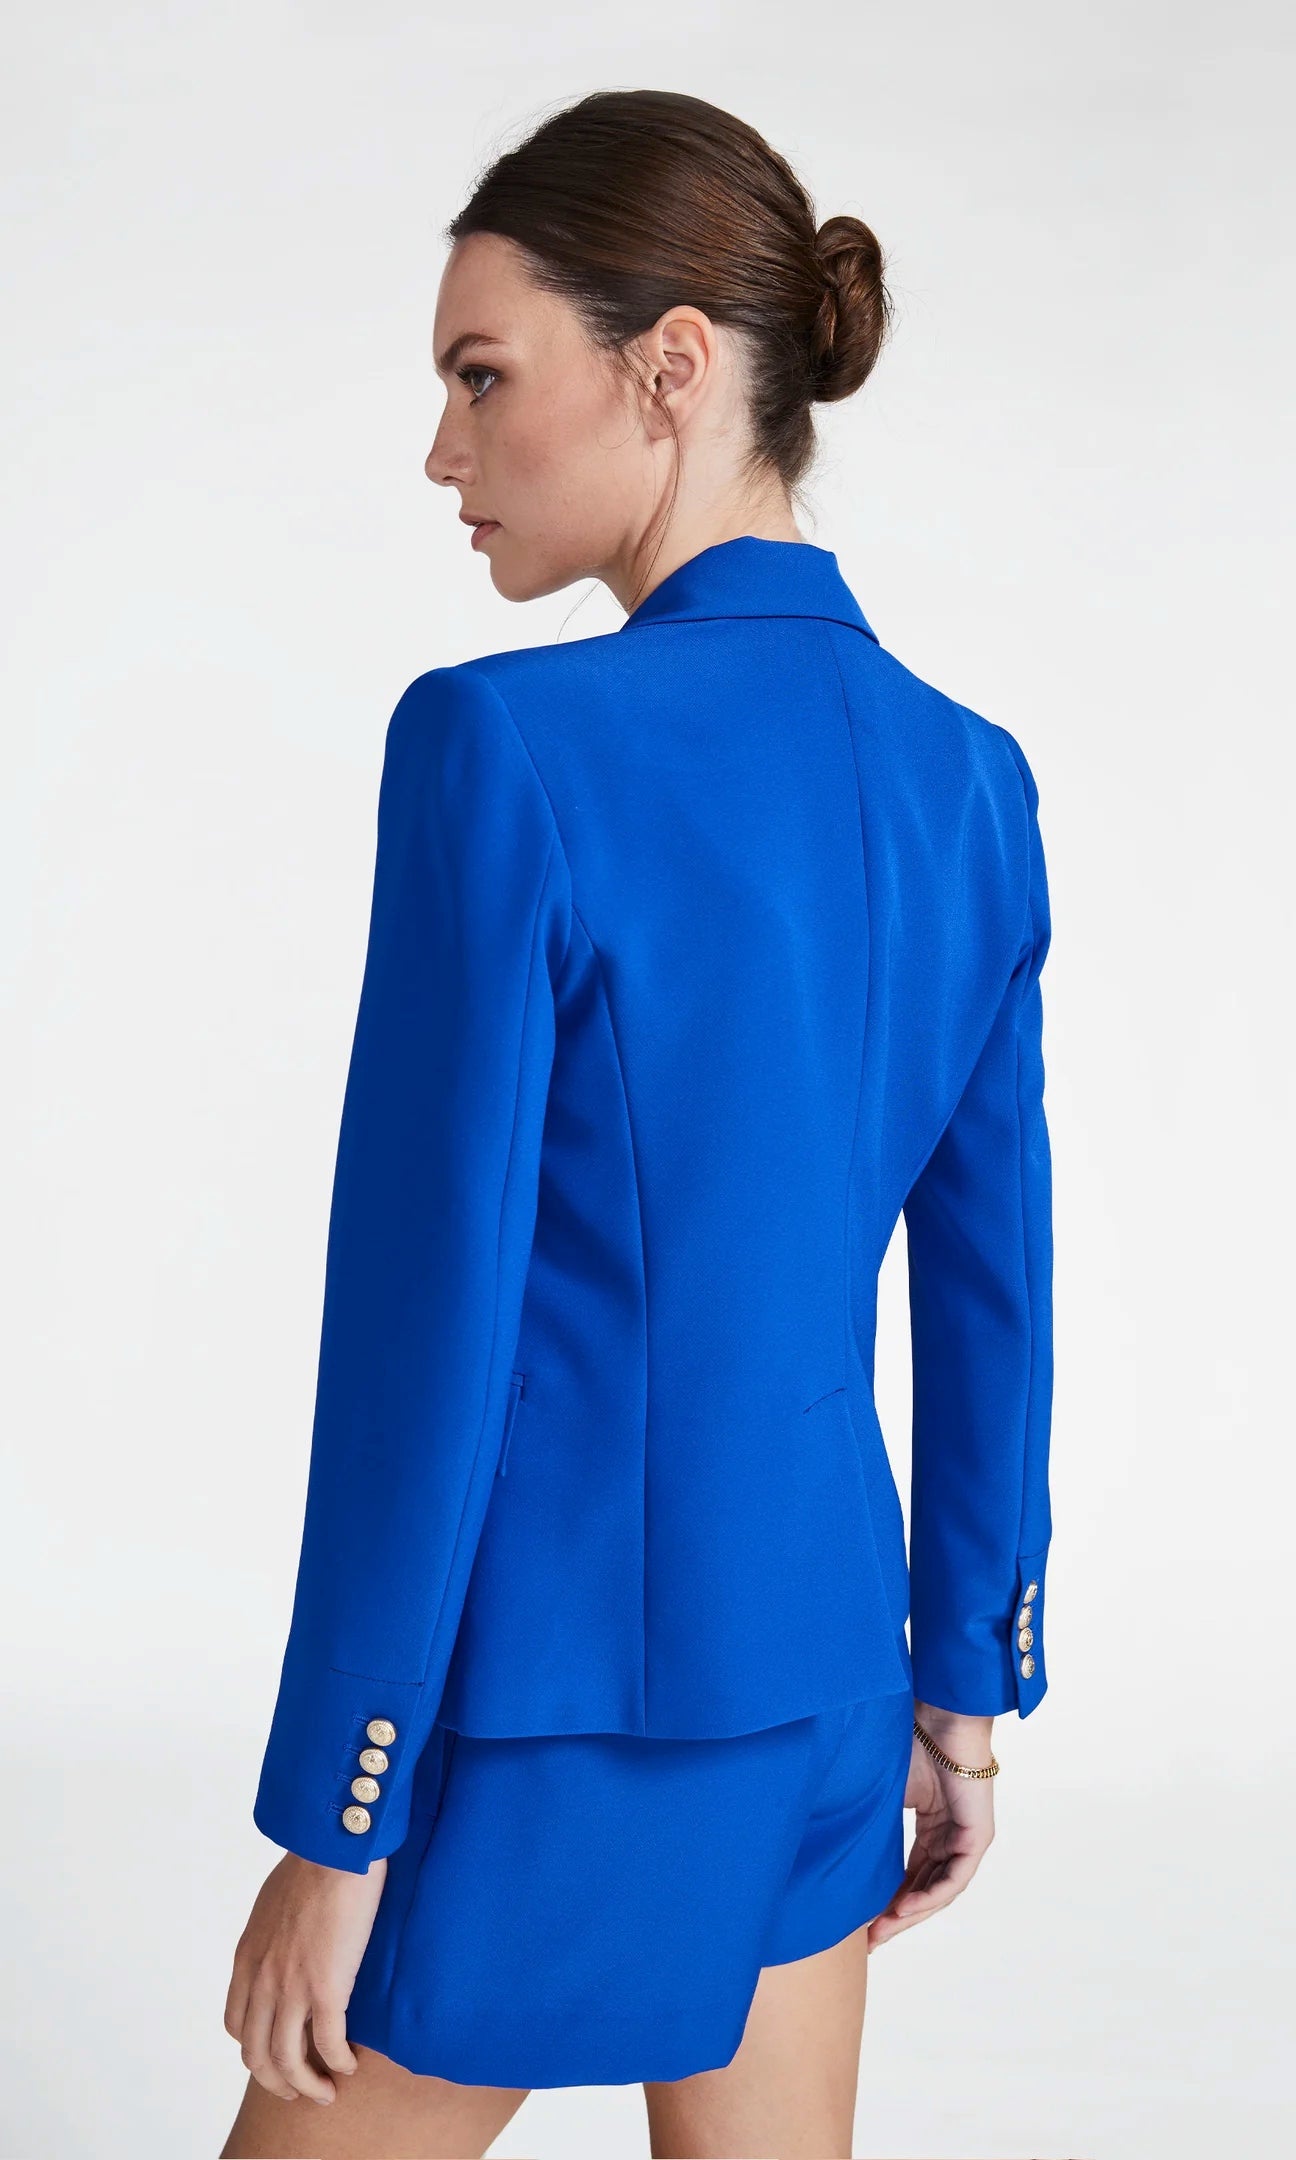 Generation Love Delilah Crepe Blazer in Royal Blue - Size M Available